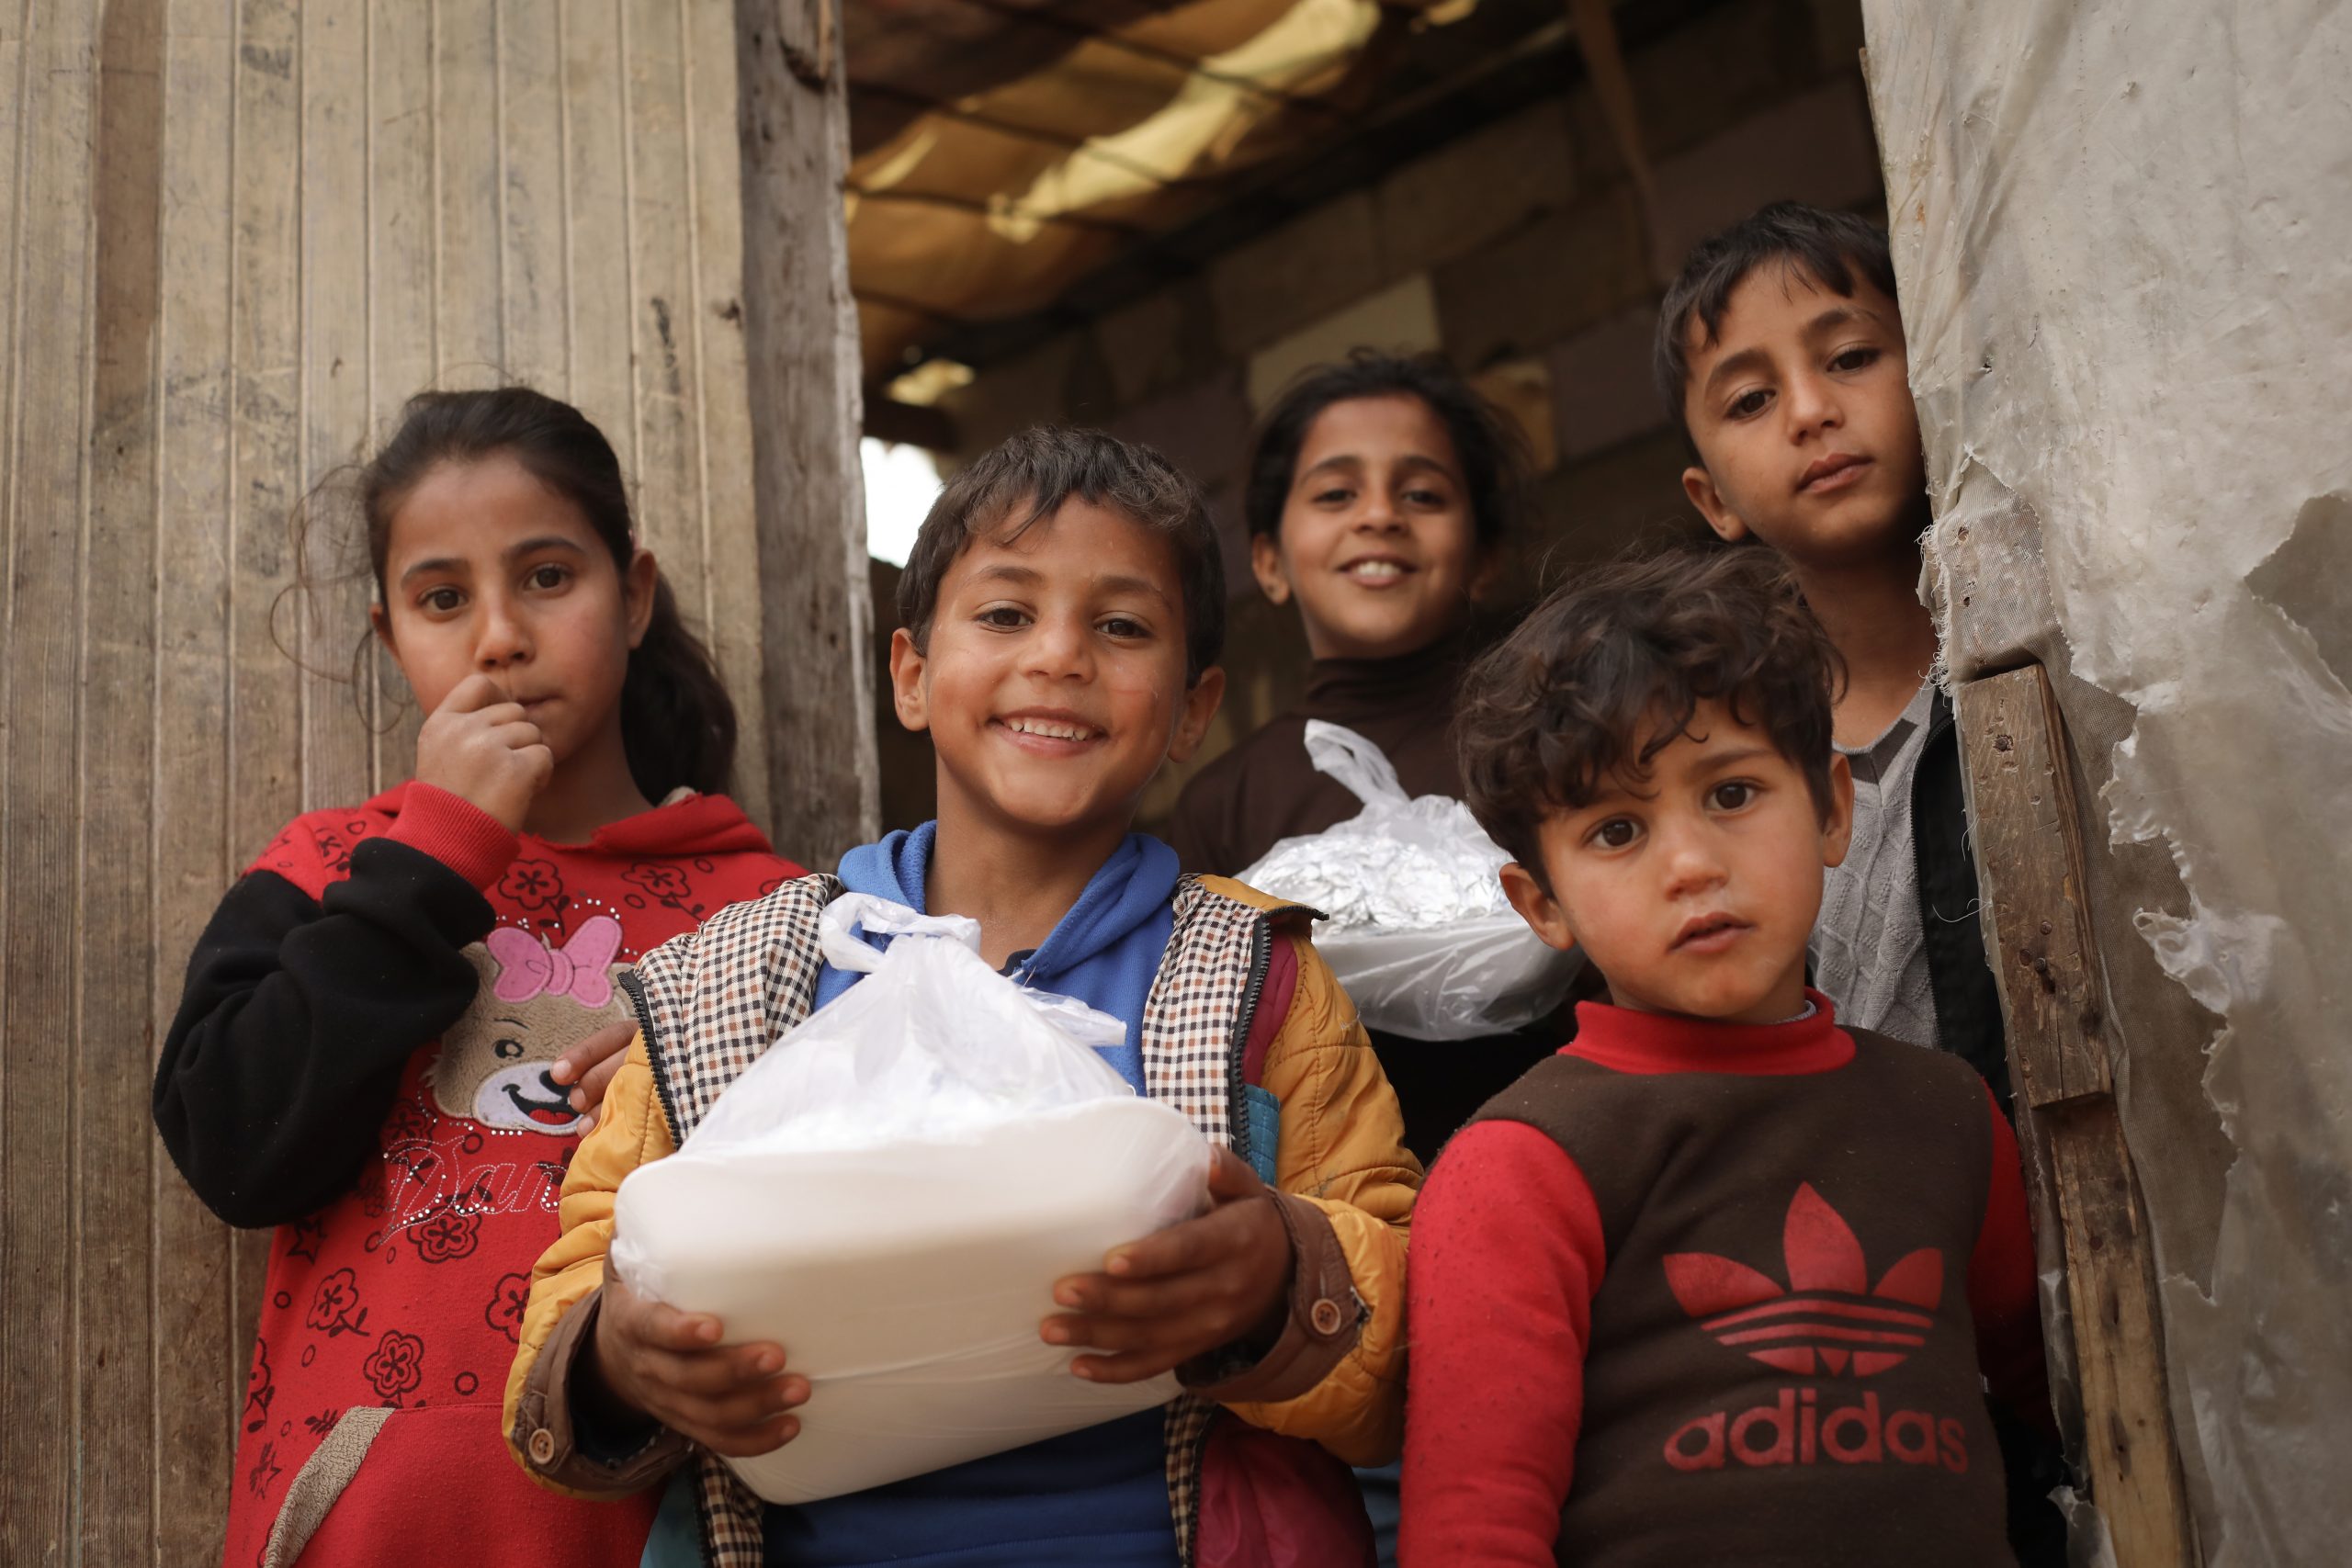 group of five young children with a to go package of food